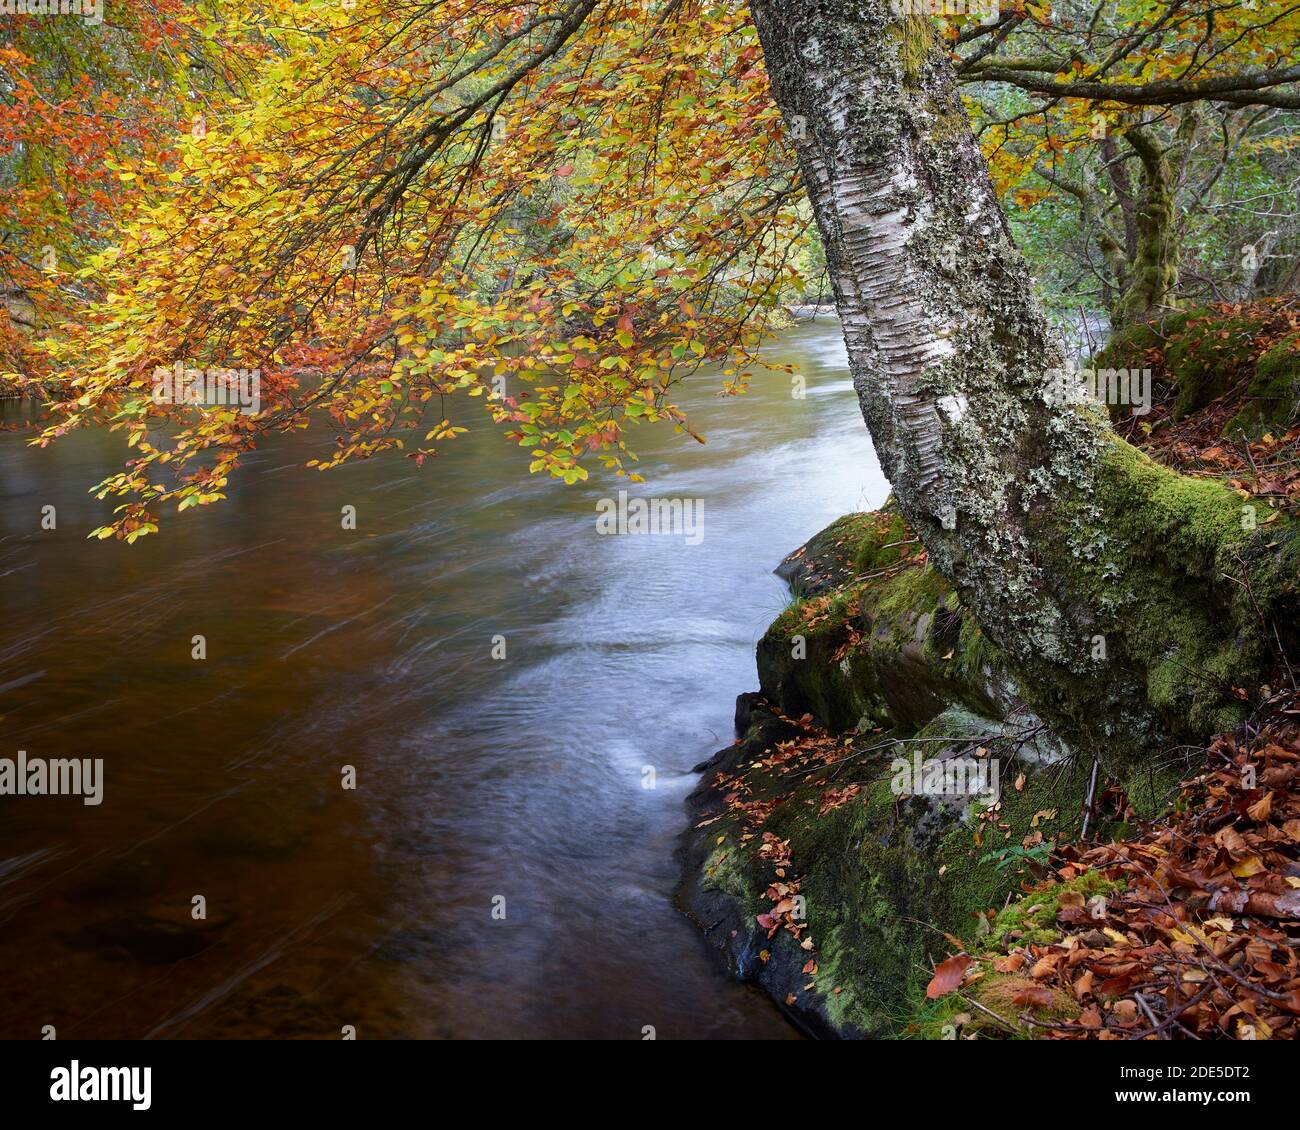 Trees in autumn colours on the banks of the River Lyon, Glen Lyon, Perth and Kinross, Scotland.Trees in autumn colours on the banks of the River Lyon, Stock Photo